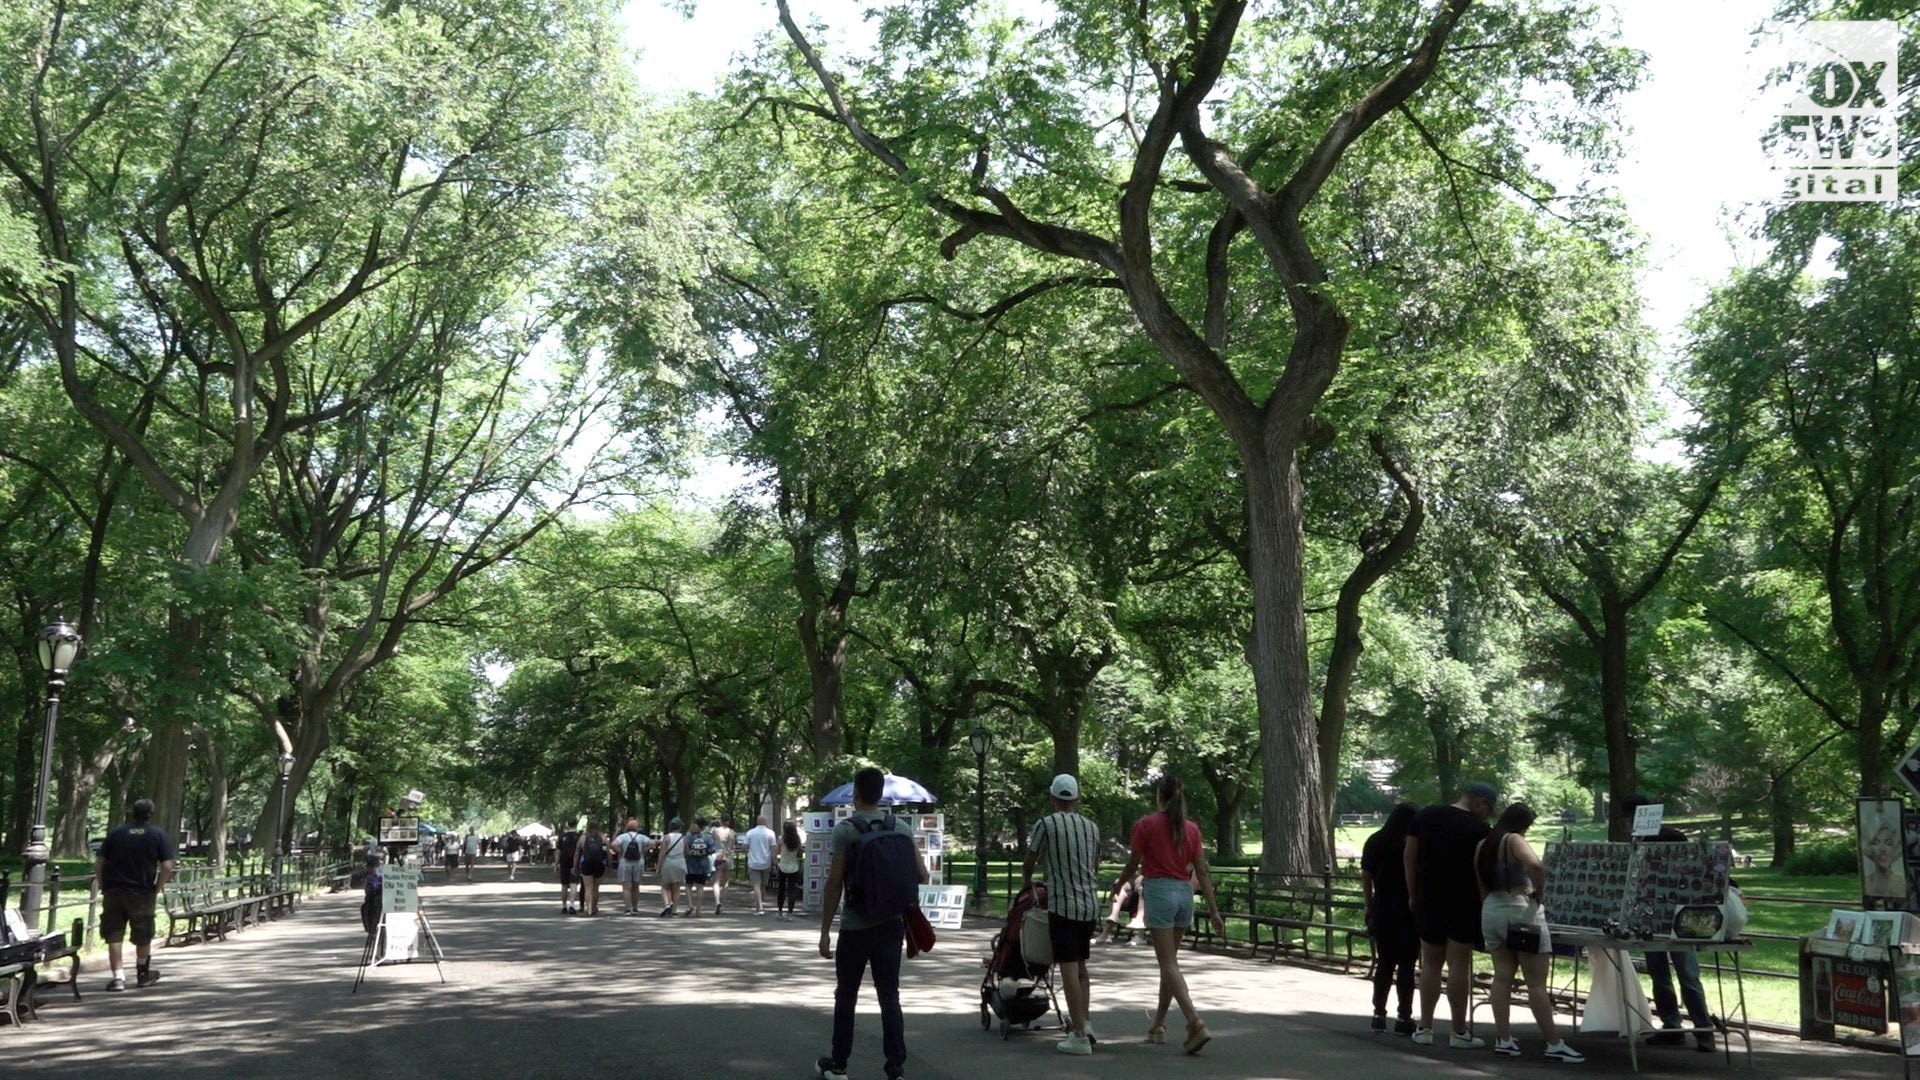 For Father’s Day, Central Park visitors share their dads’ best advice – World news